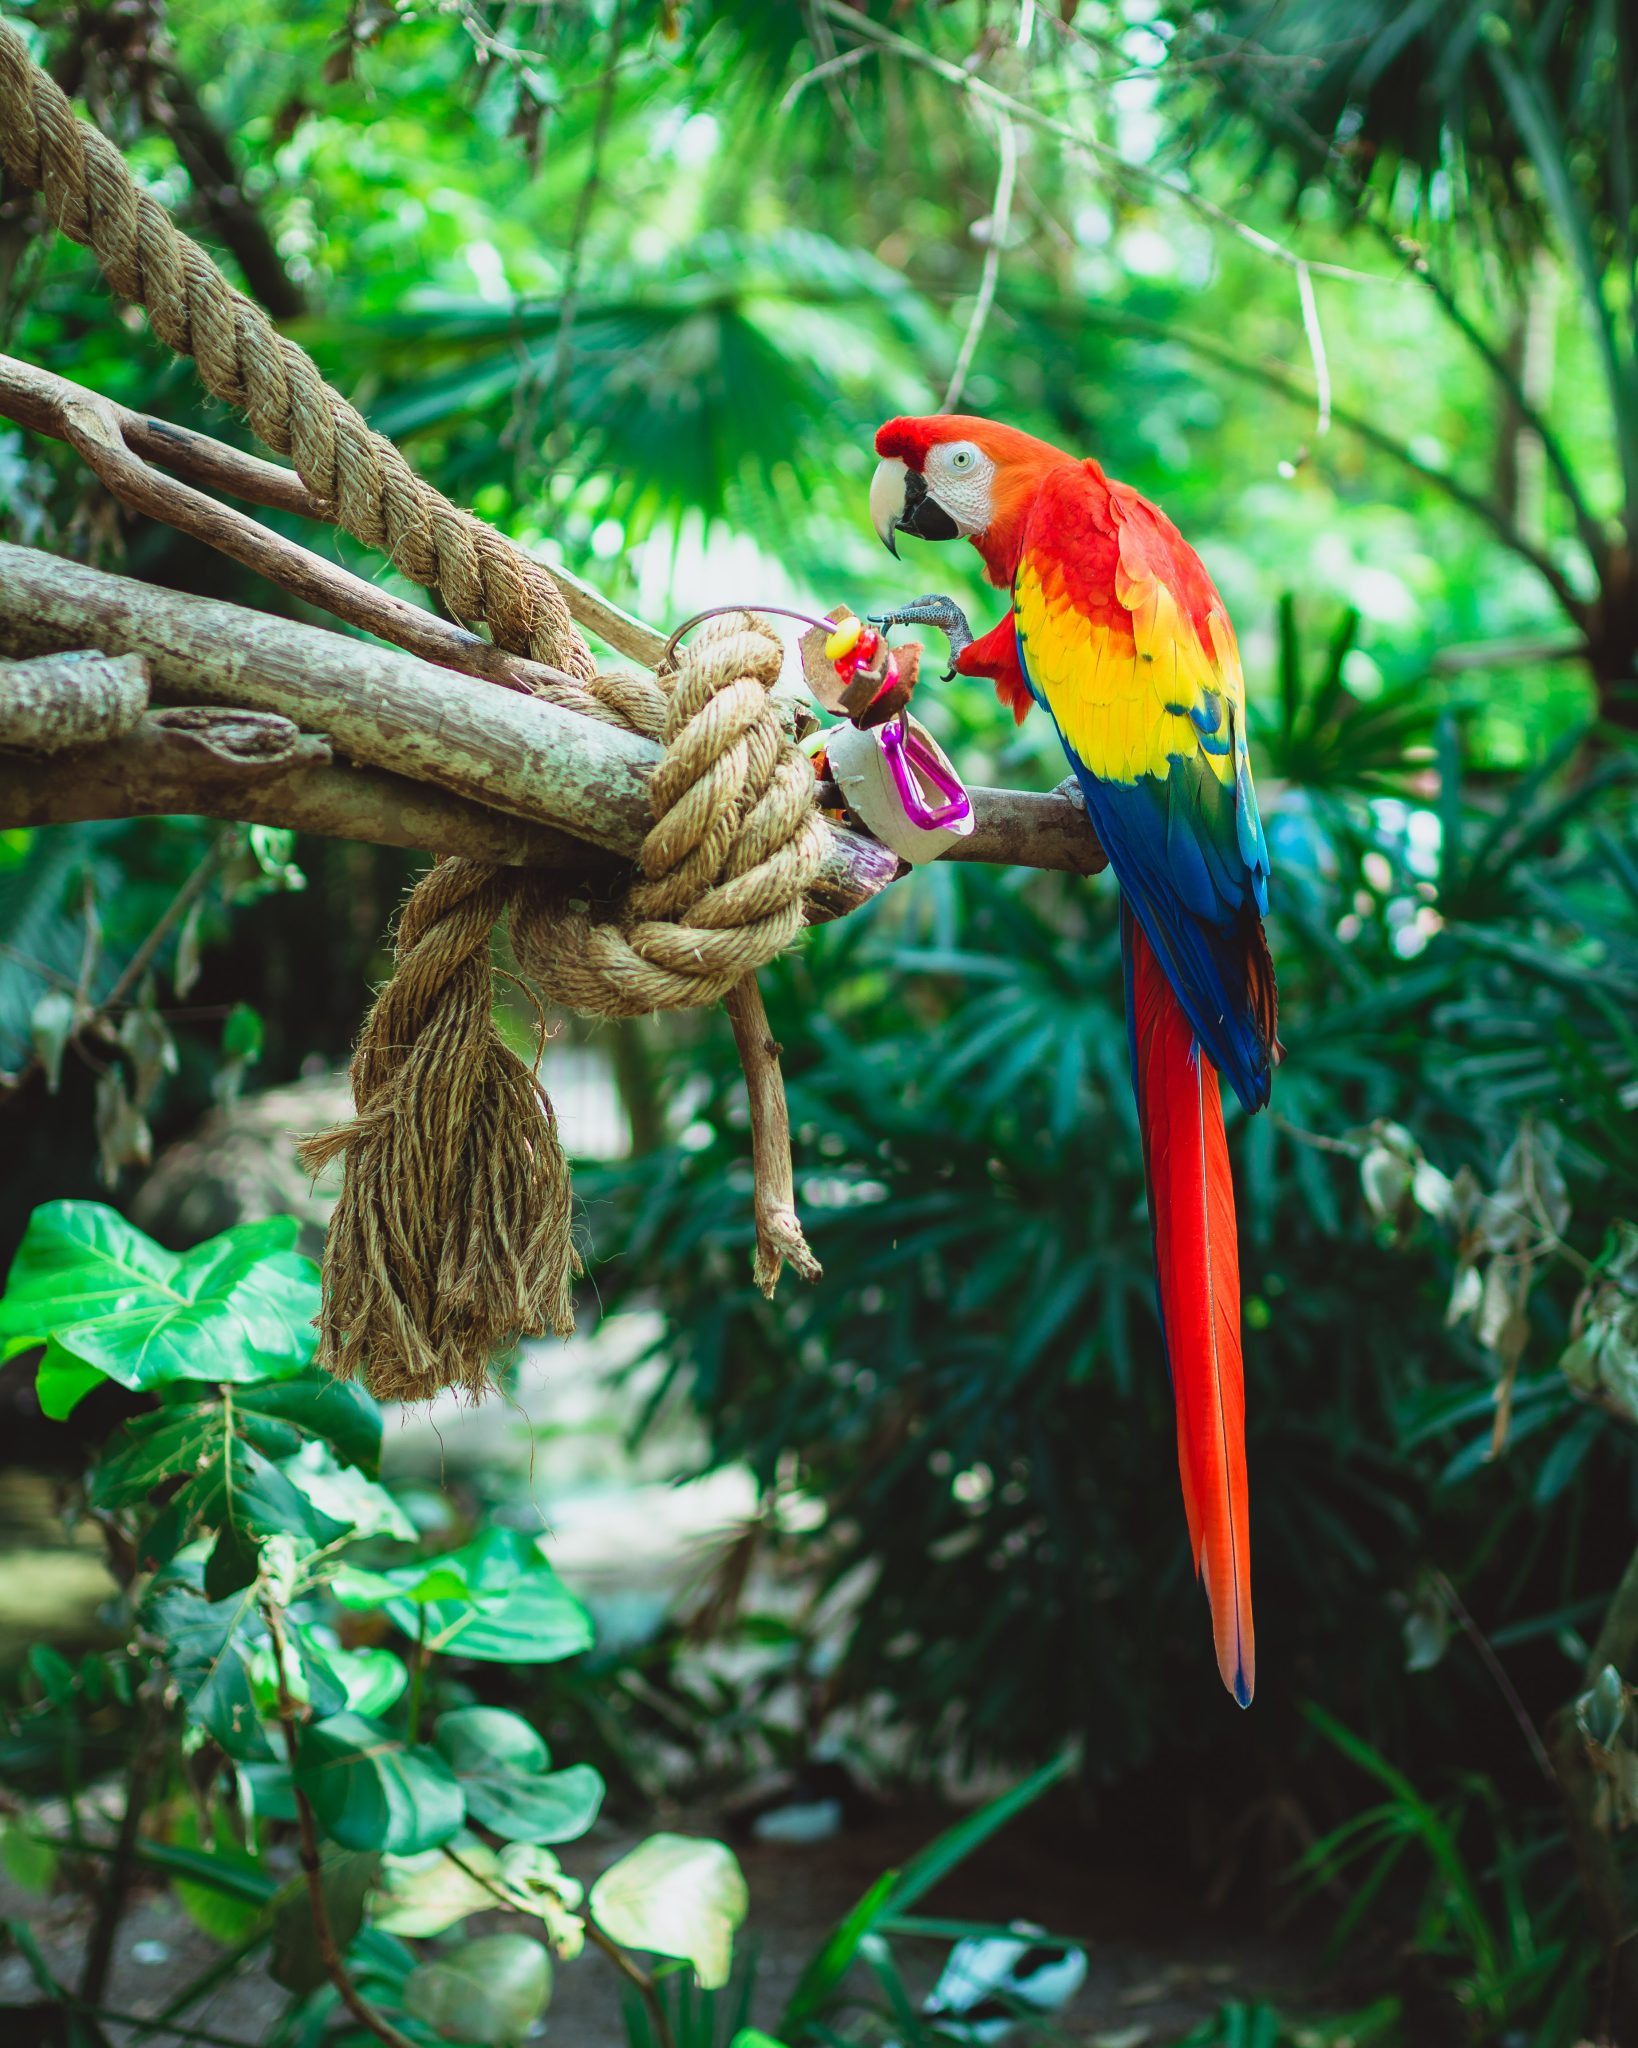 Macaw parrot with a long tail perched on a branch